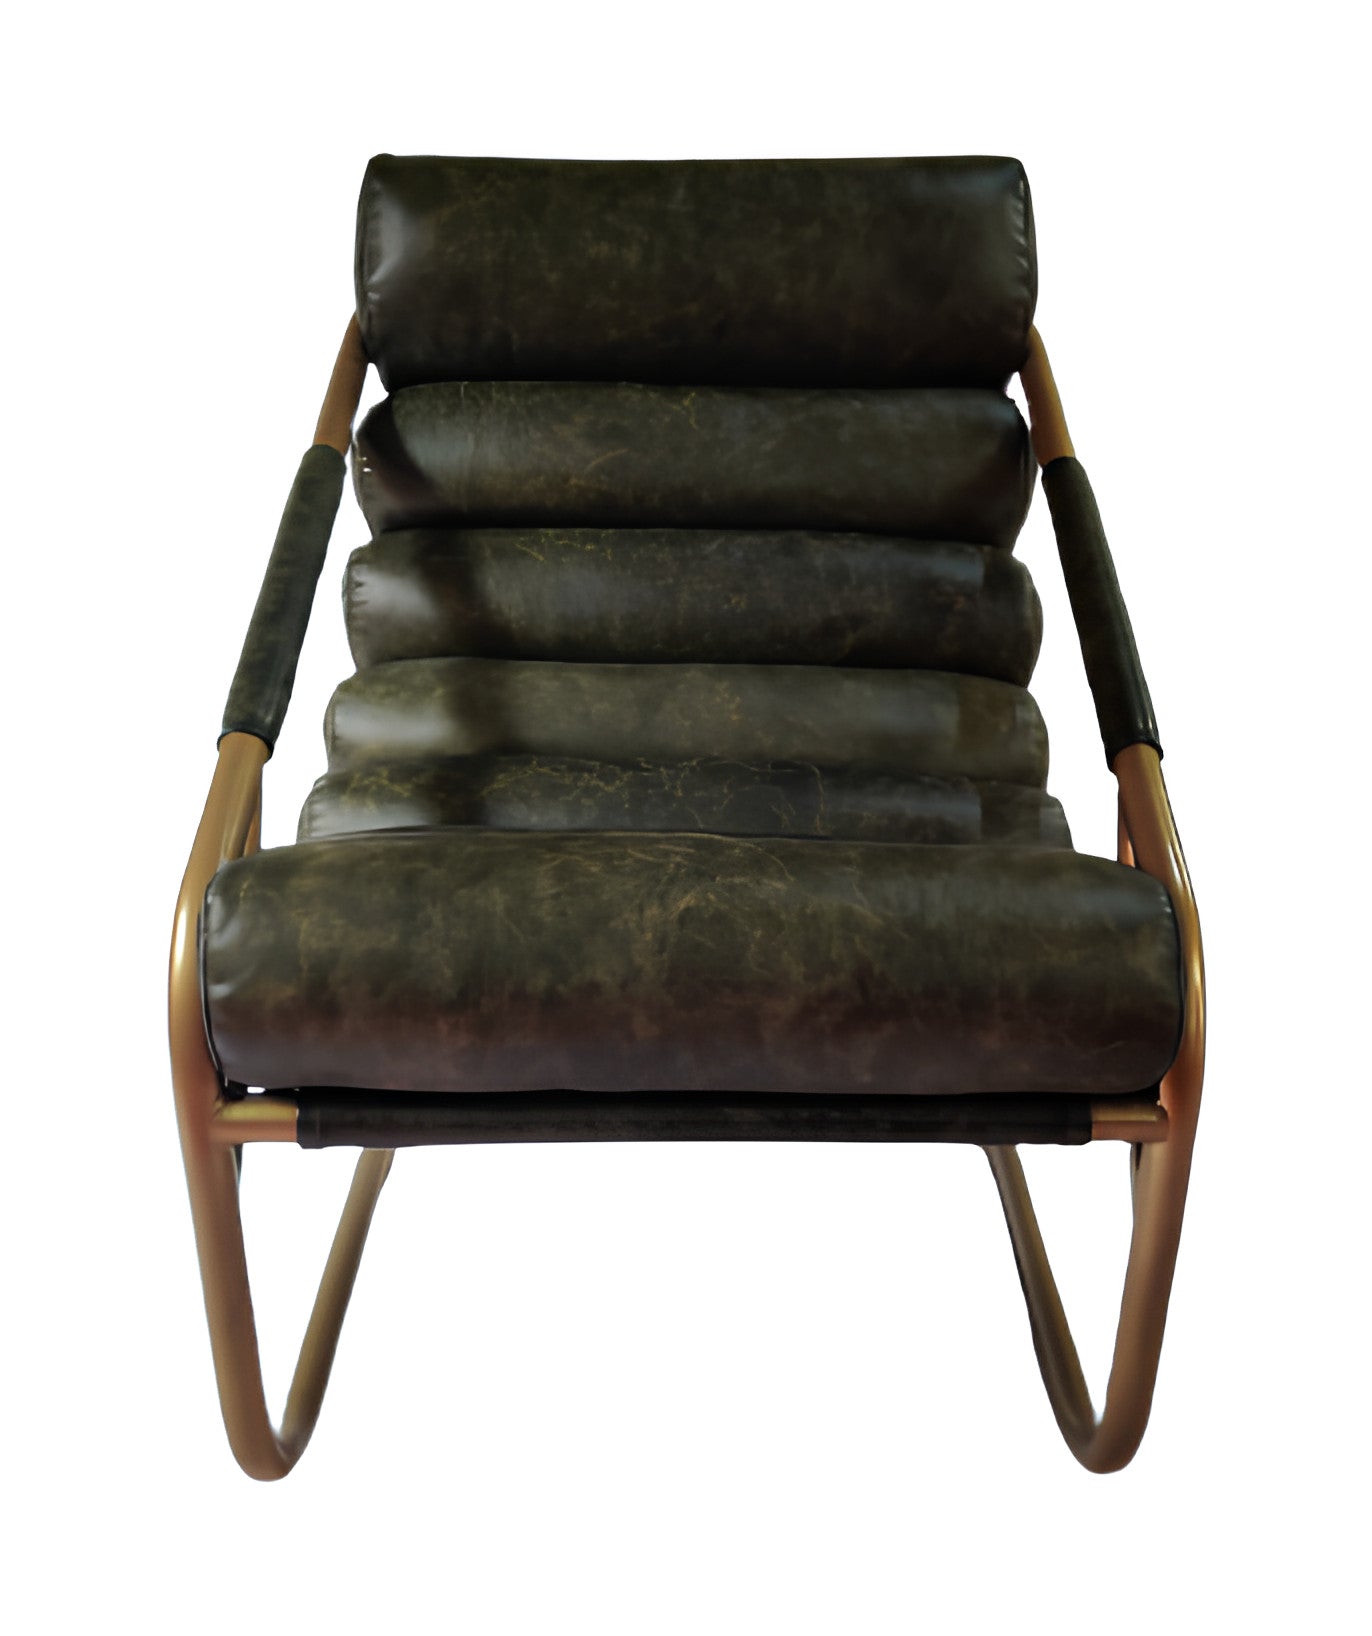 25" Green And Gold Top Grain Leather Tufted Lounge Chair